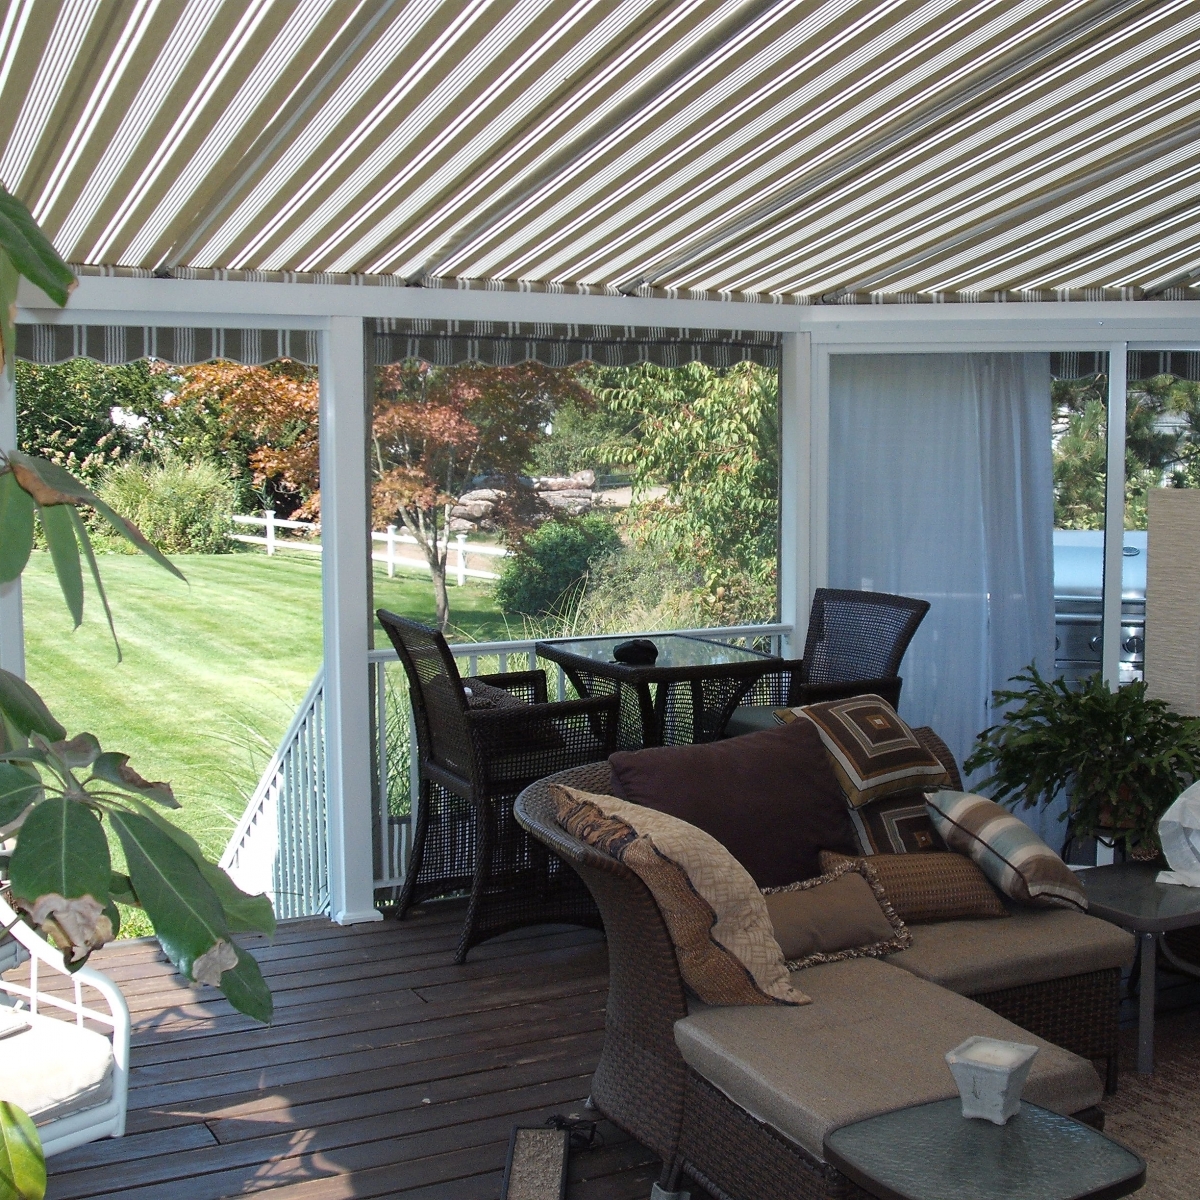 Stationary Awnings Gallery - Leisure Time Awnings